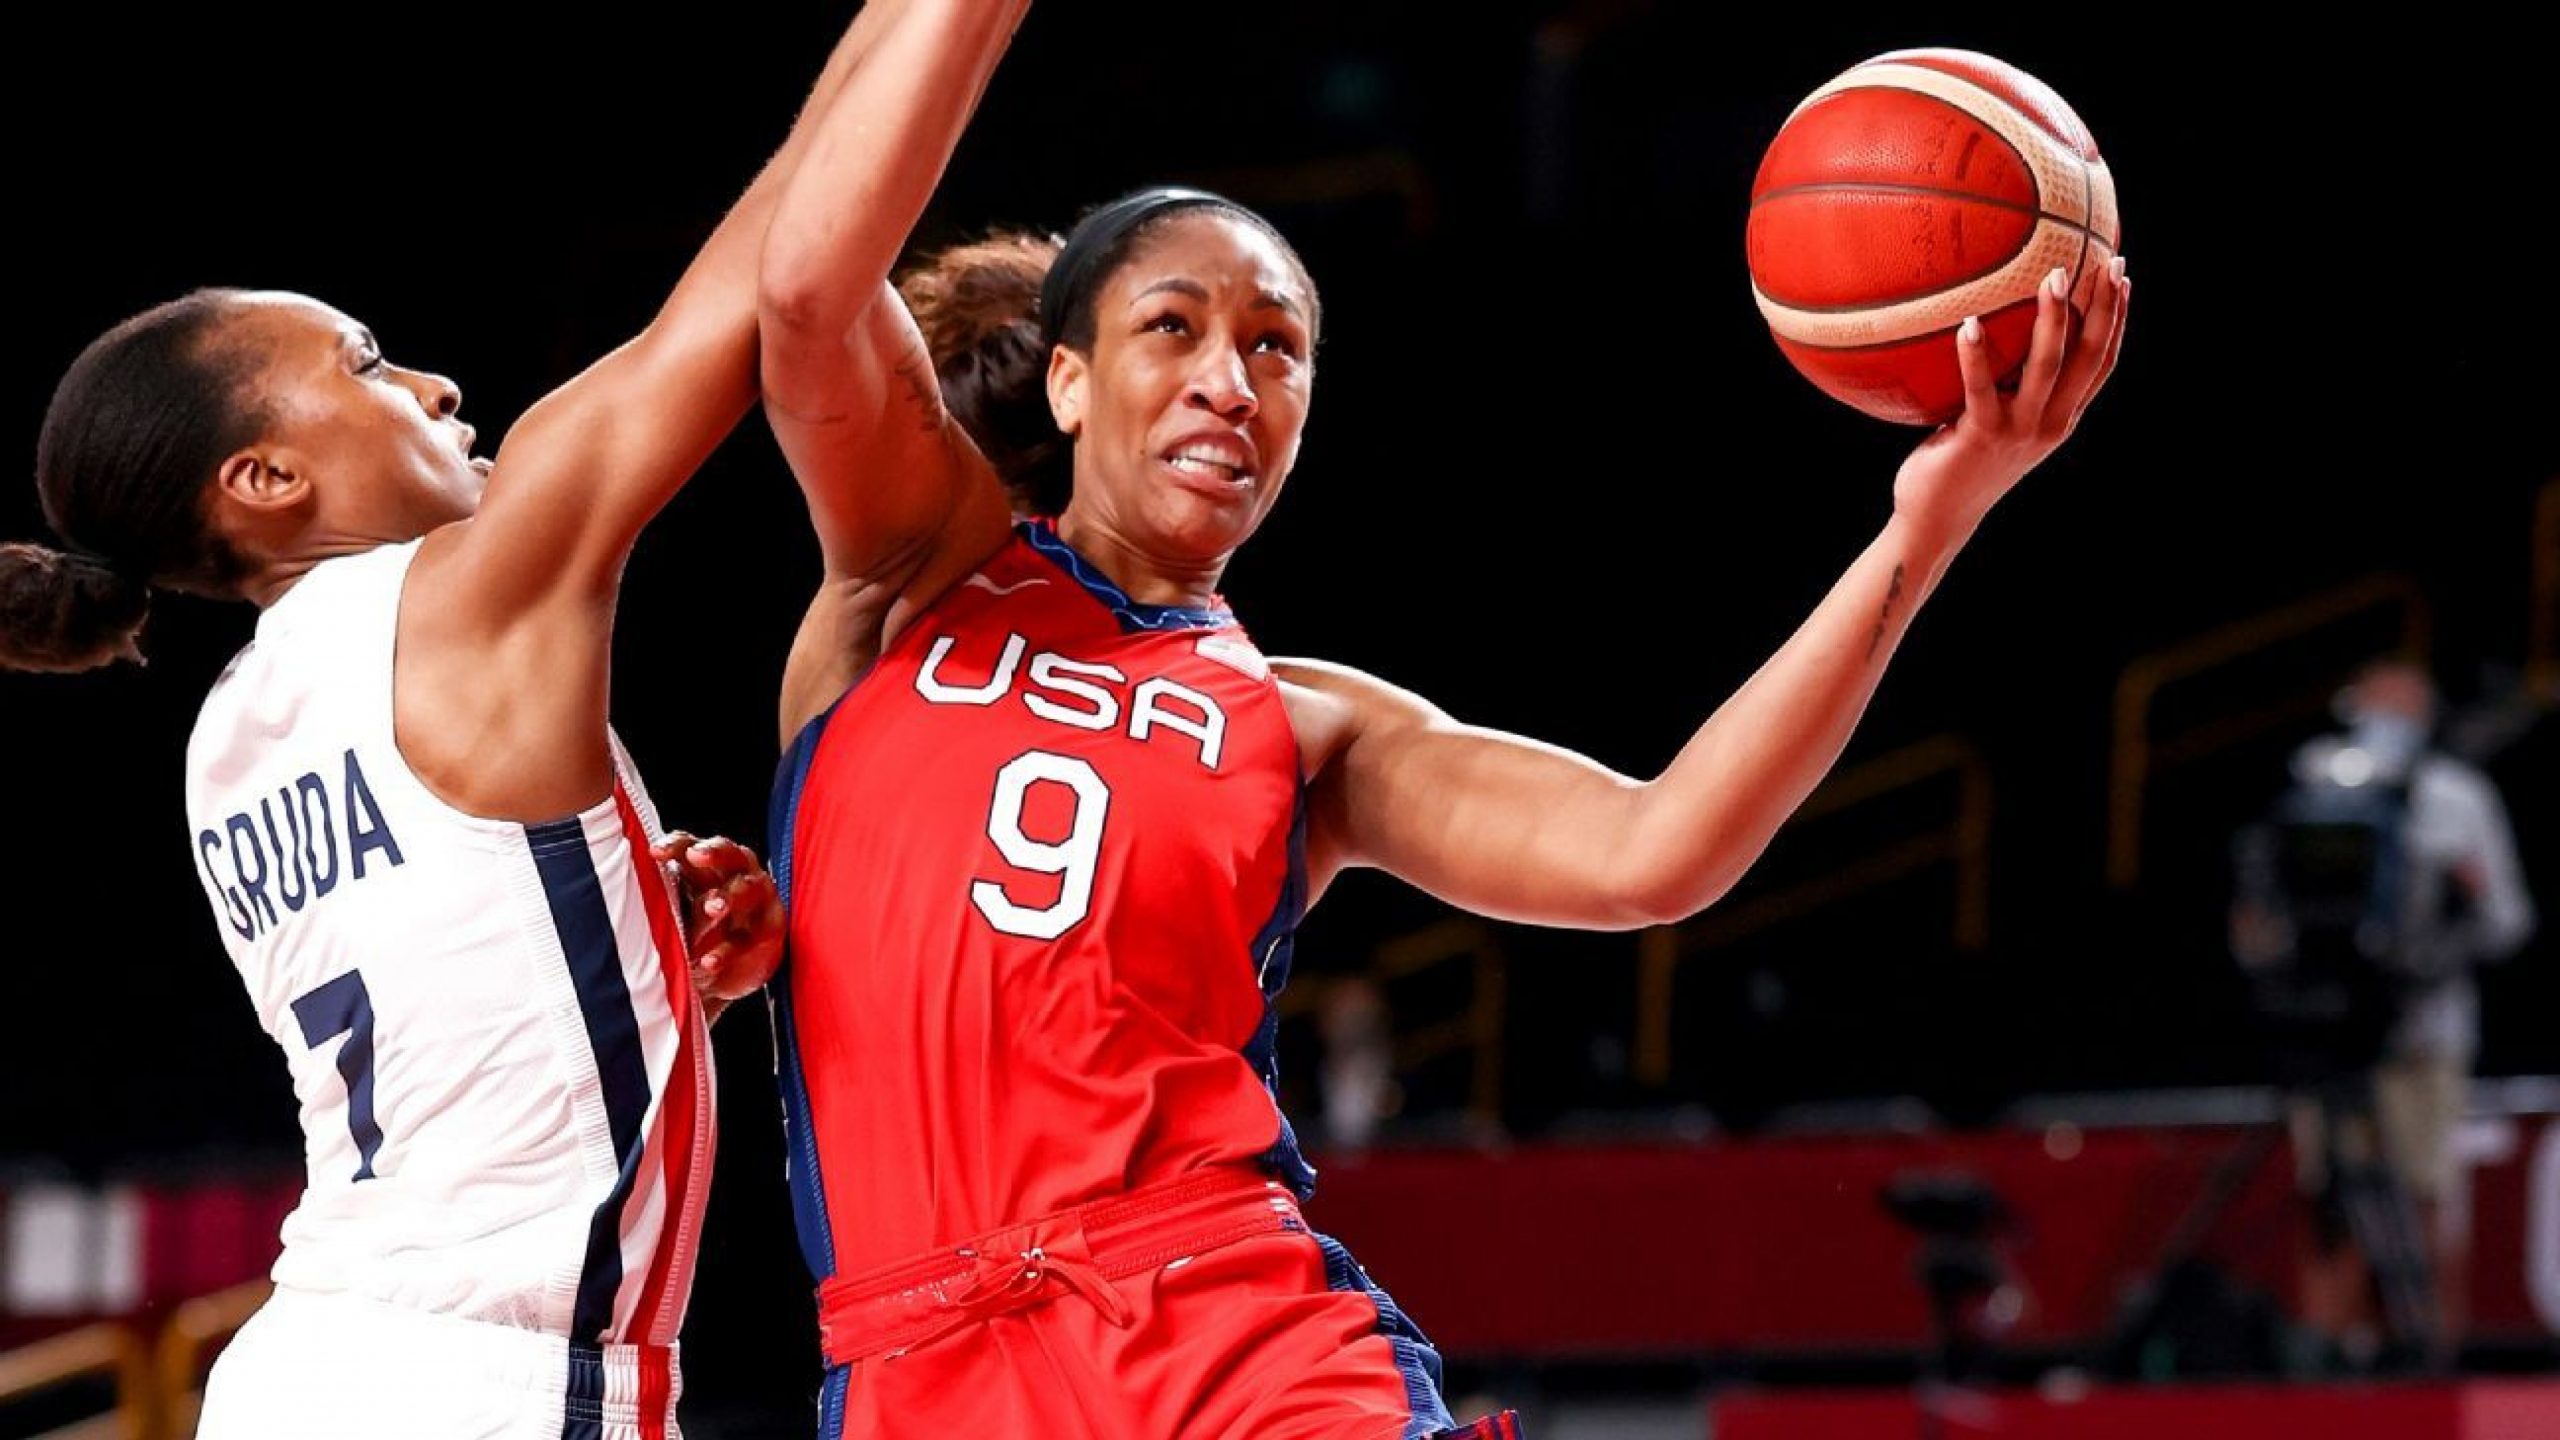 France tests Team USA women’s basketball, Harrison takes silver by a sliver